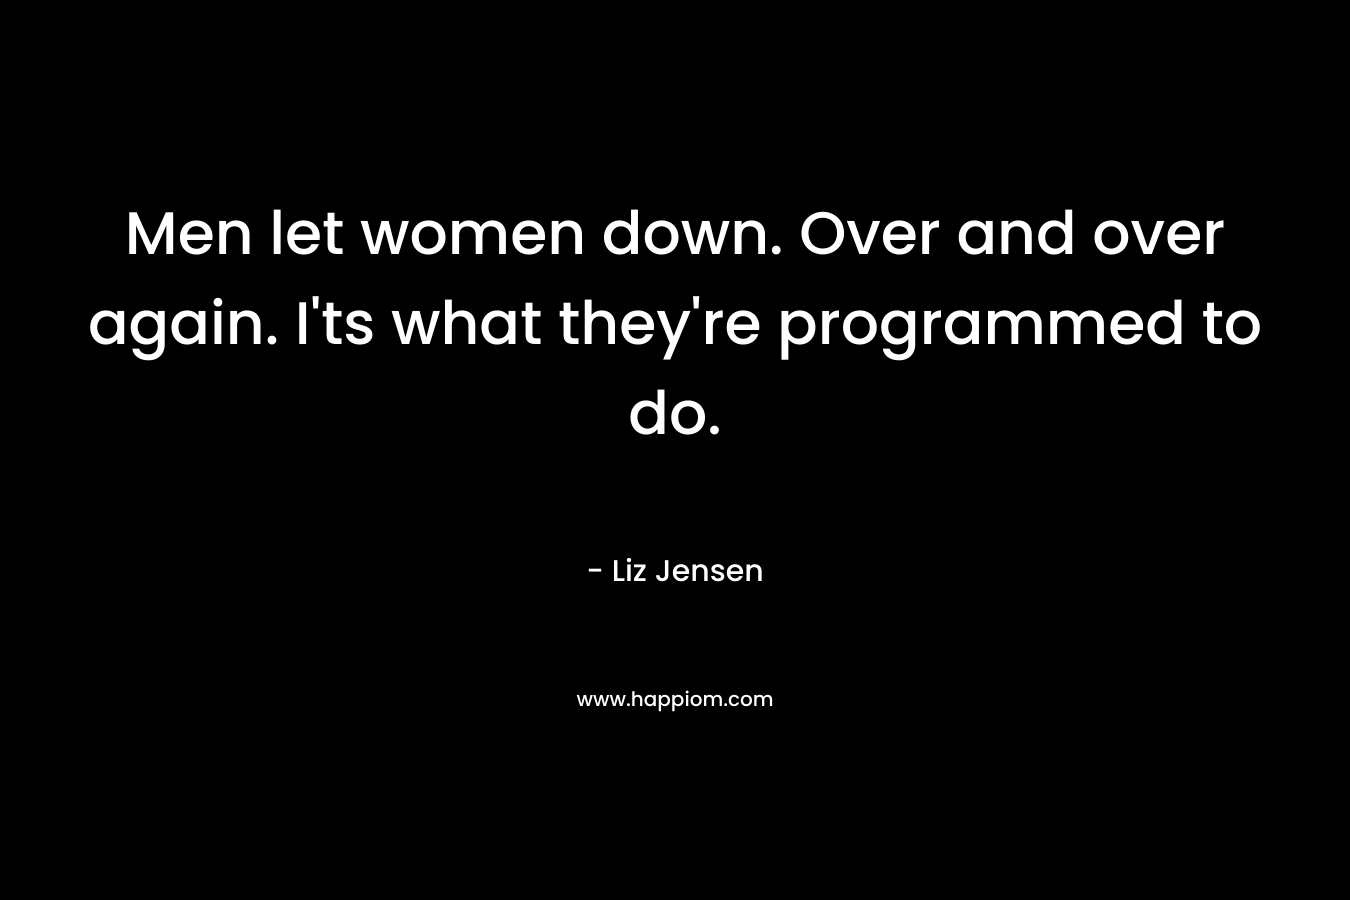 Men let women down. Over and over again. I’ts what they’re programmed to do. – Liz Jensen